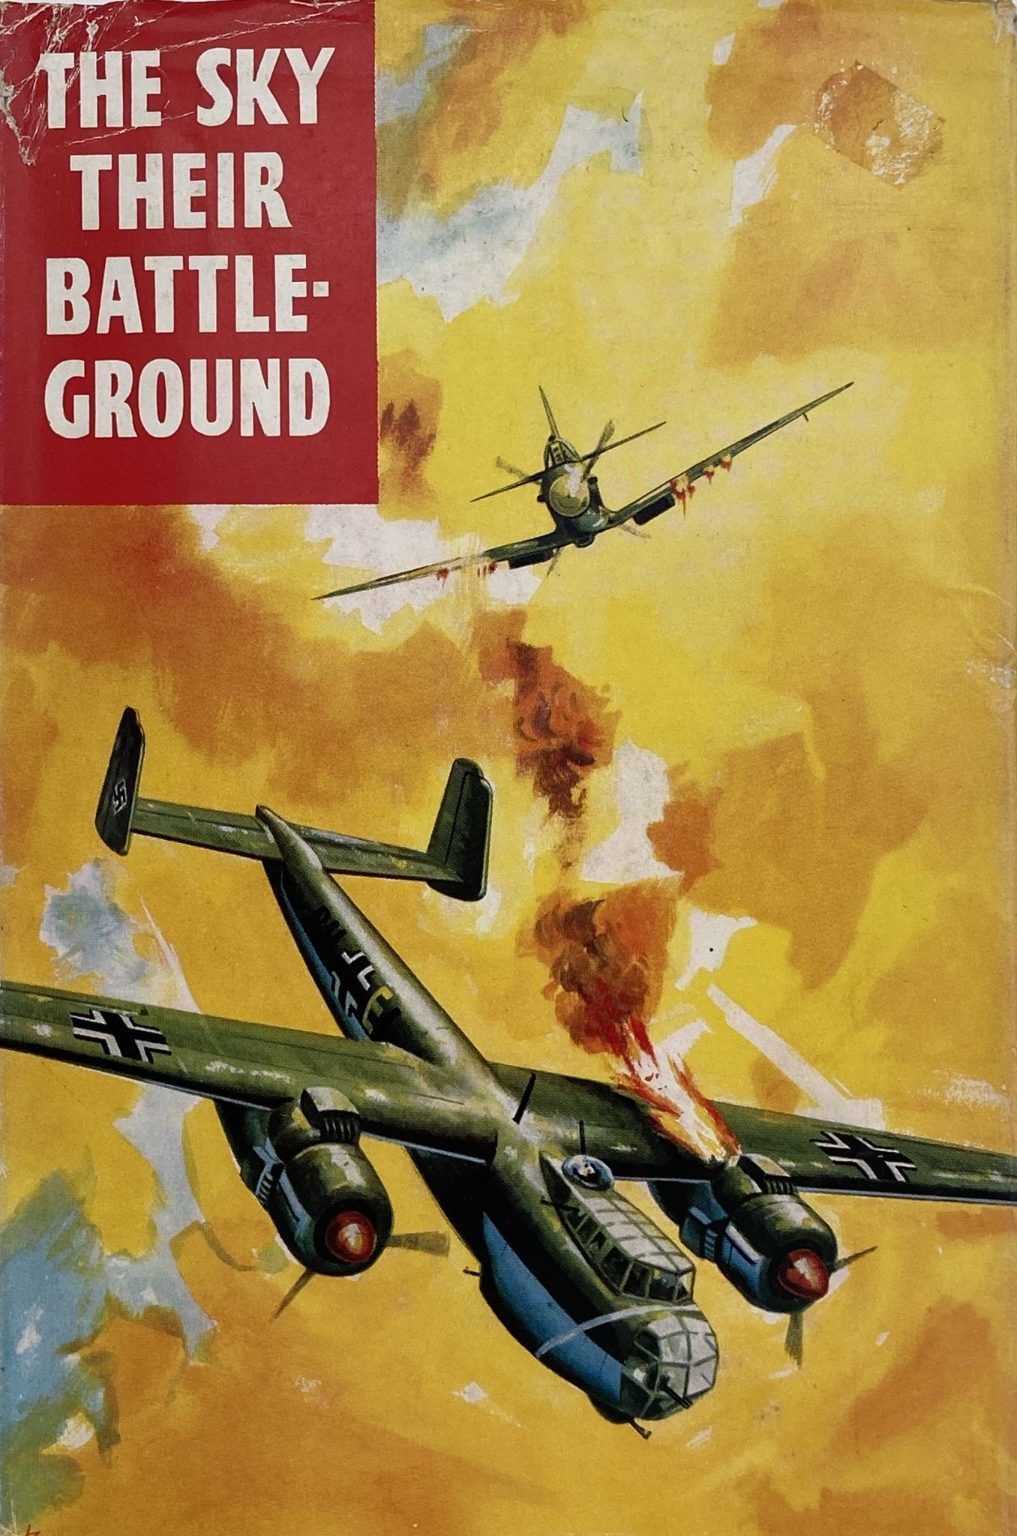 THE SKY THEIR BATTLEGROUND: True Adventure Stories From the RAF Flying Review